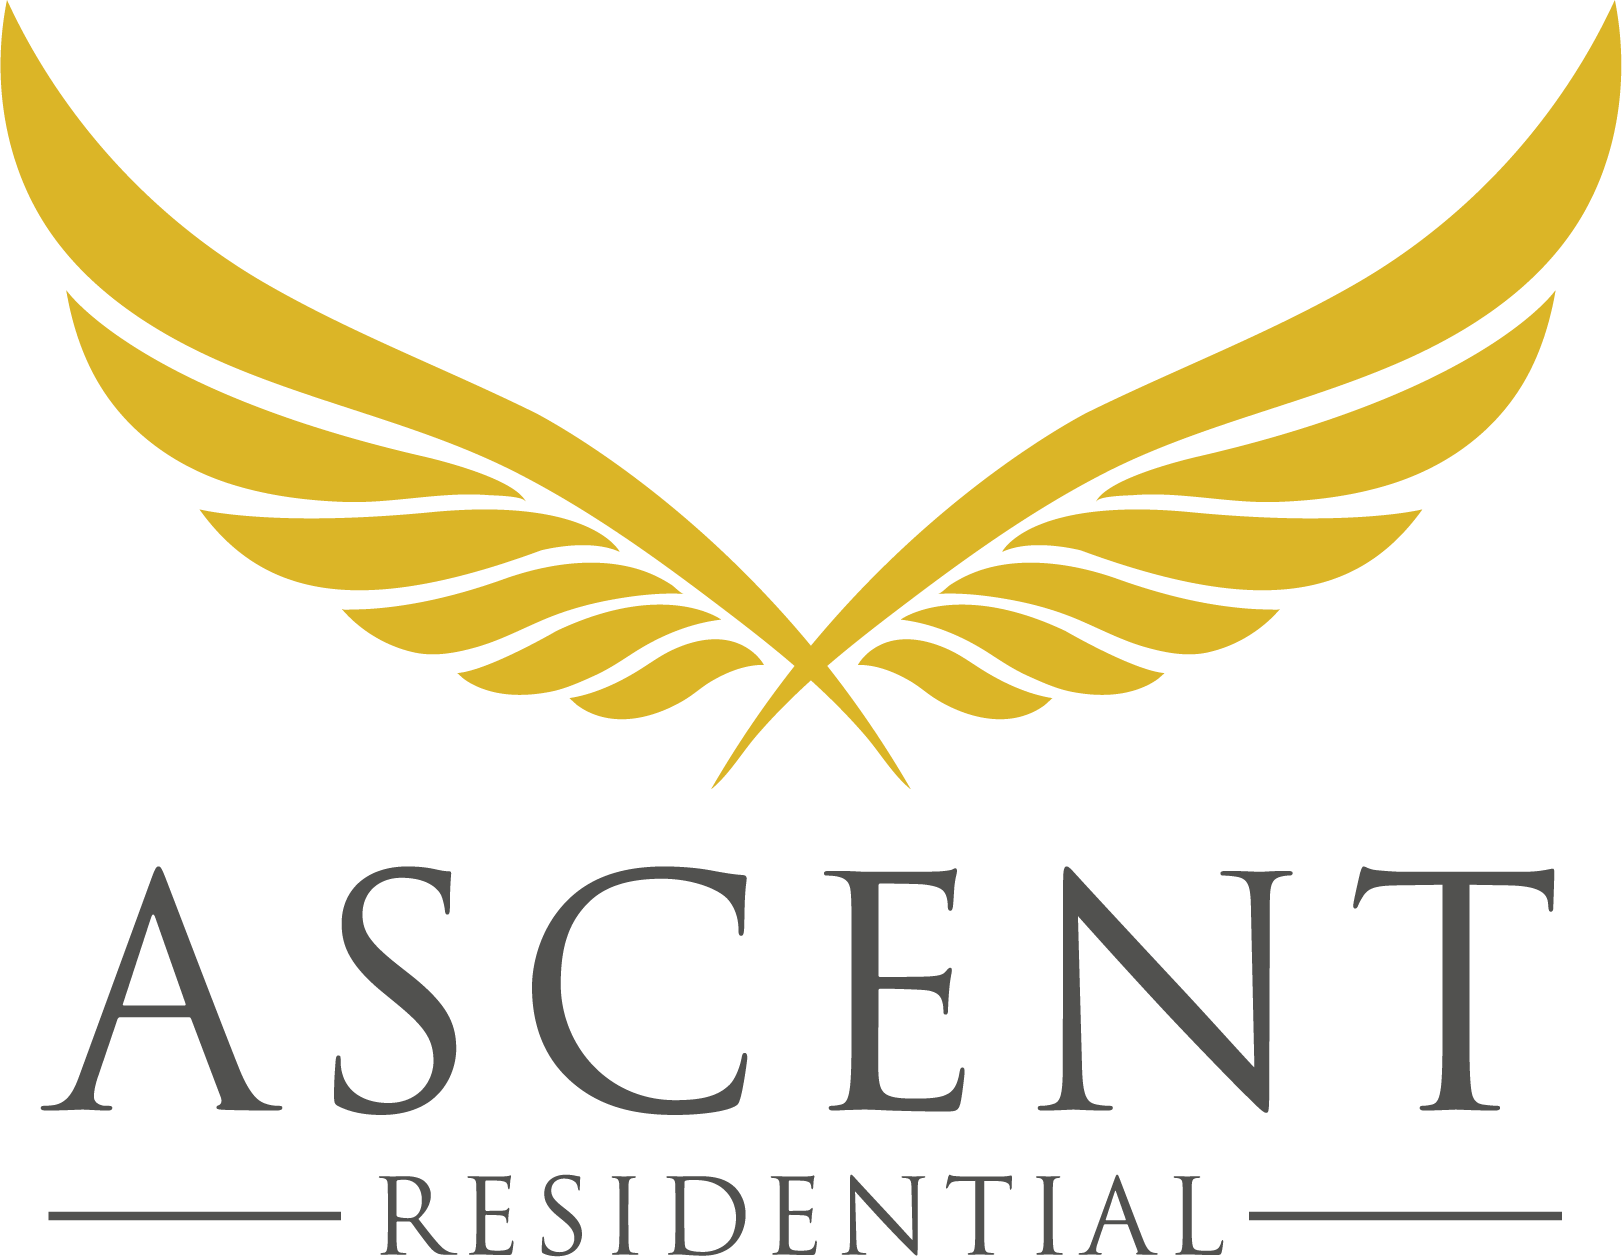 Ascent Residential